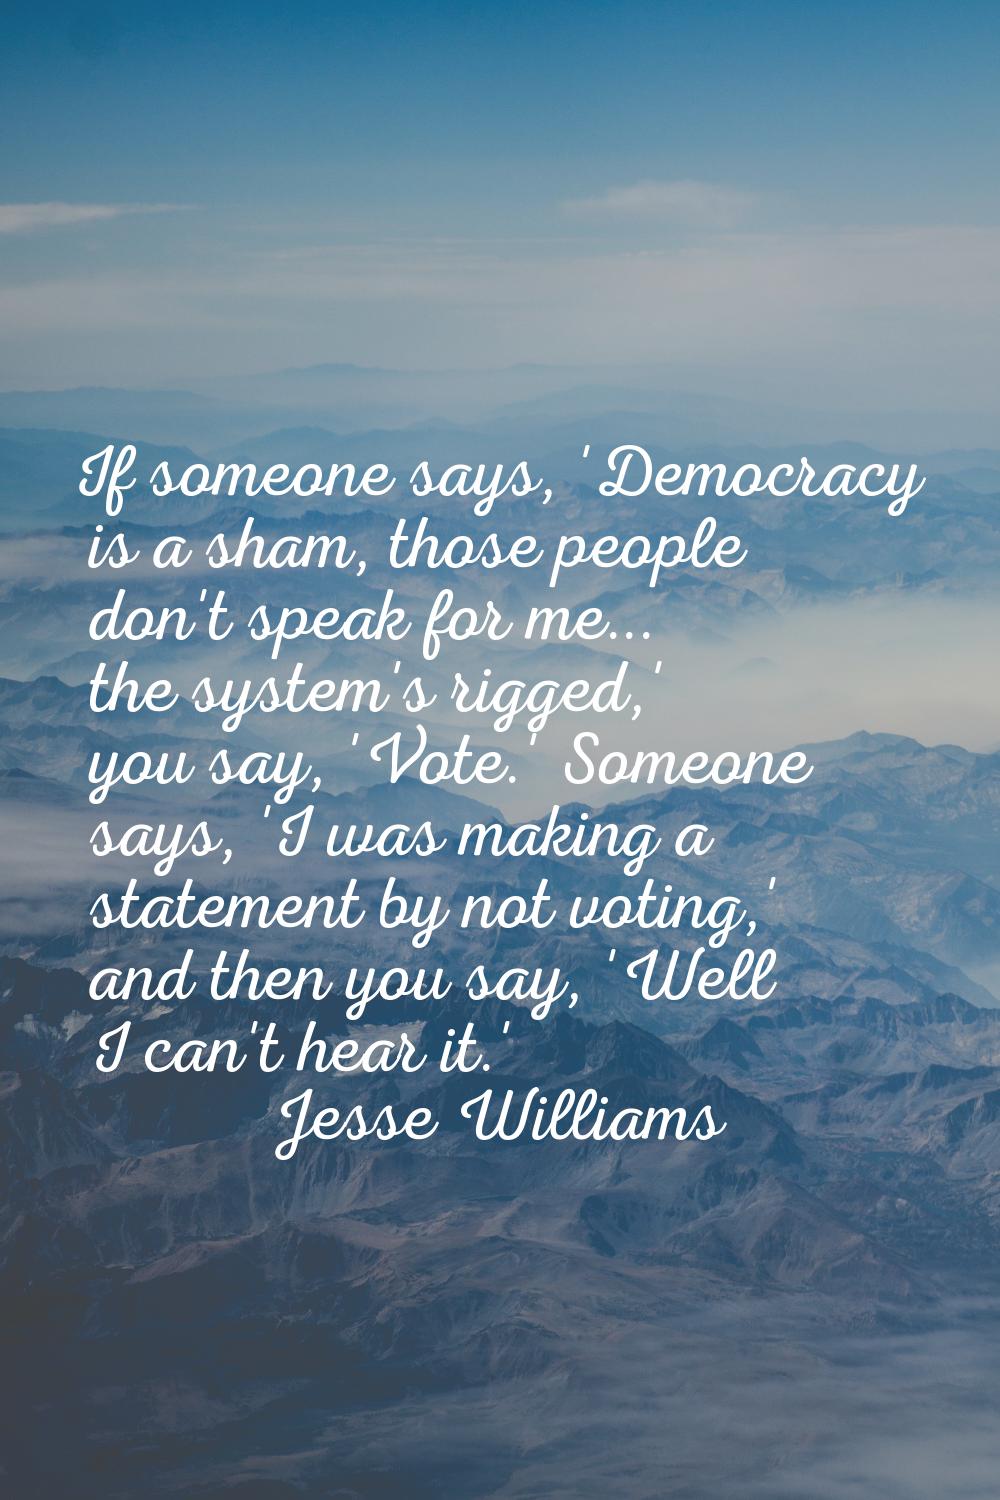 If someone says, 'Democracy is a sham, those people don't speak for me... the system's rigged,' you